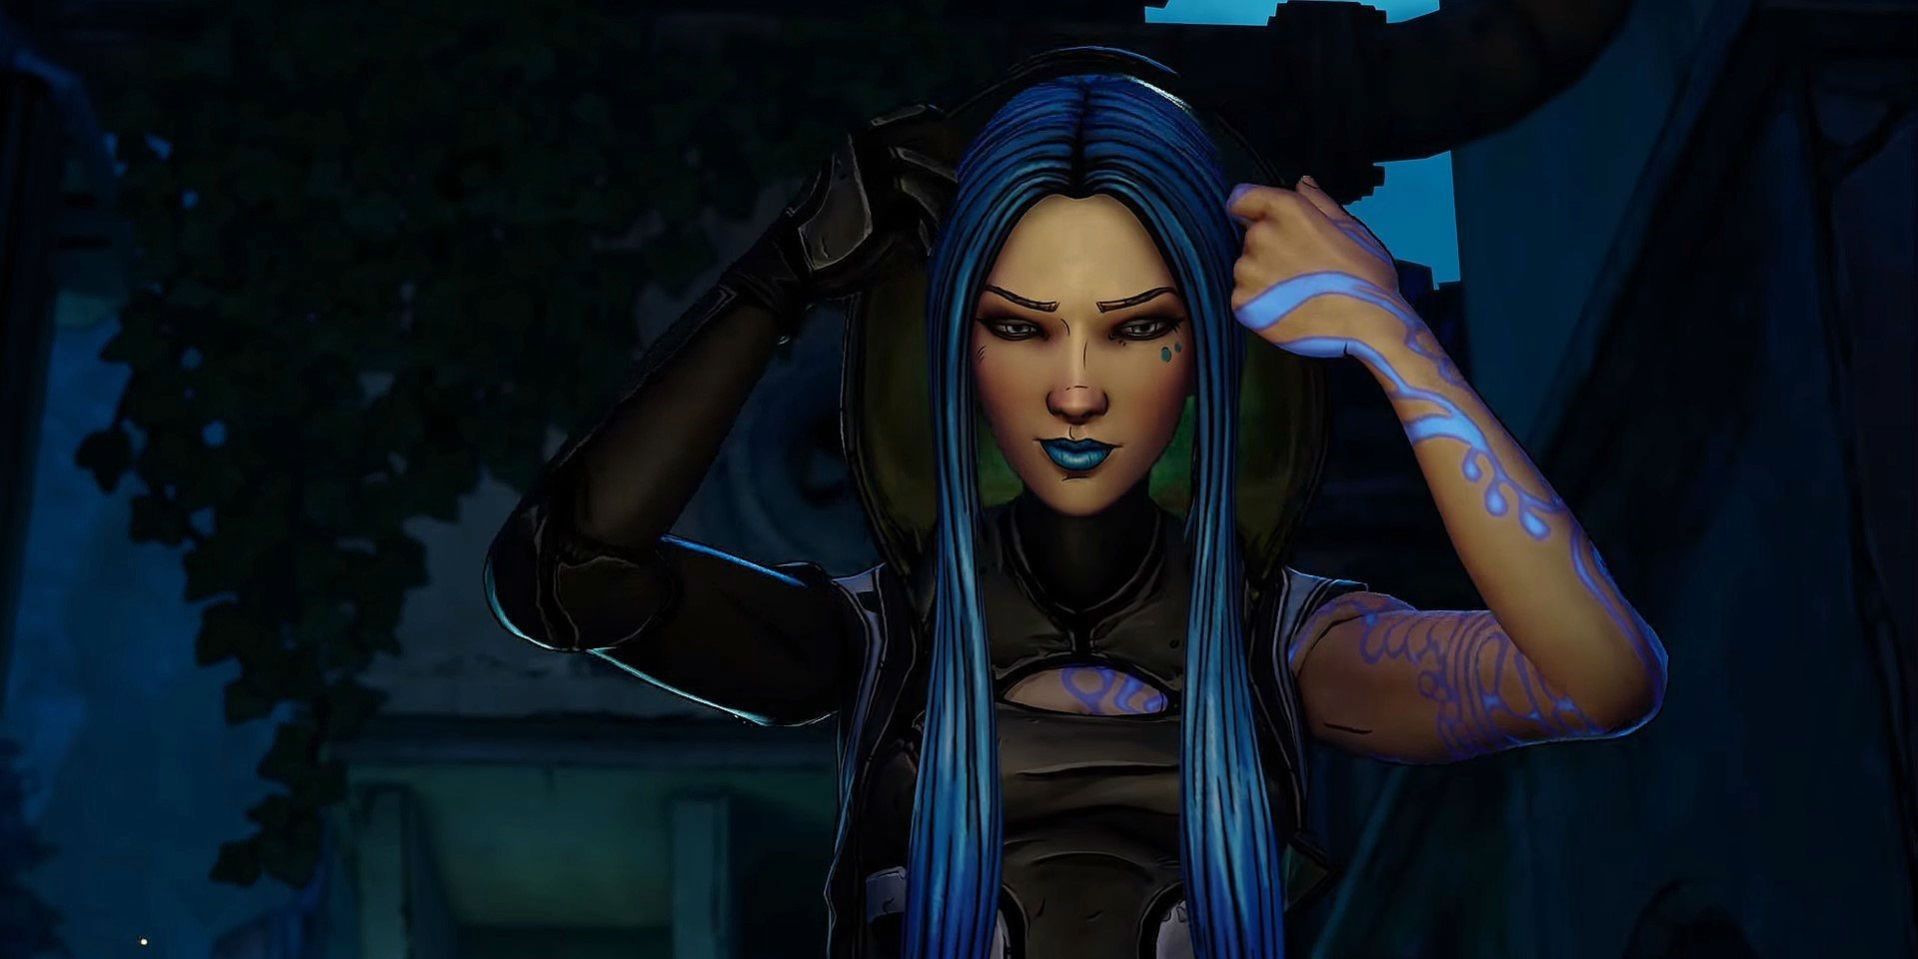 Maya taking her hood down in the woods at nighttime in Borderlands 3